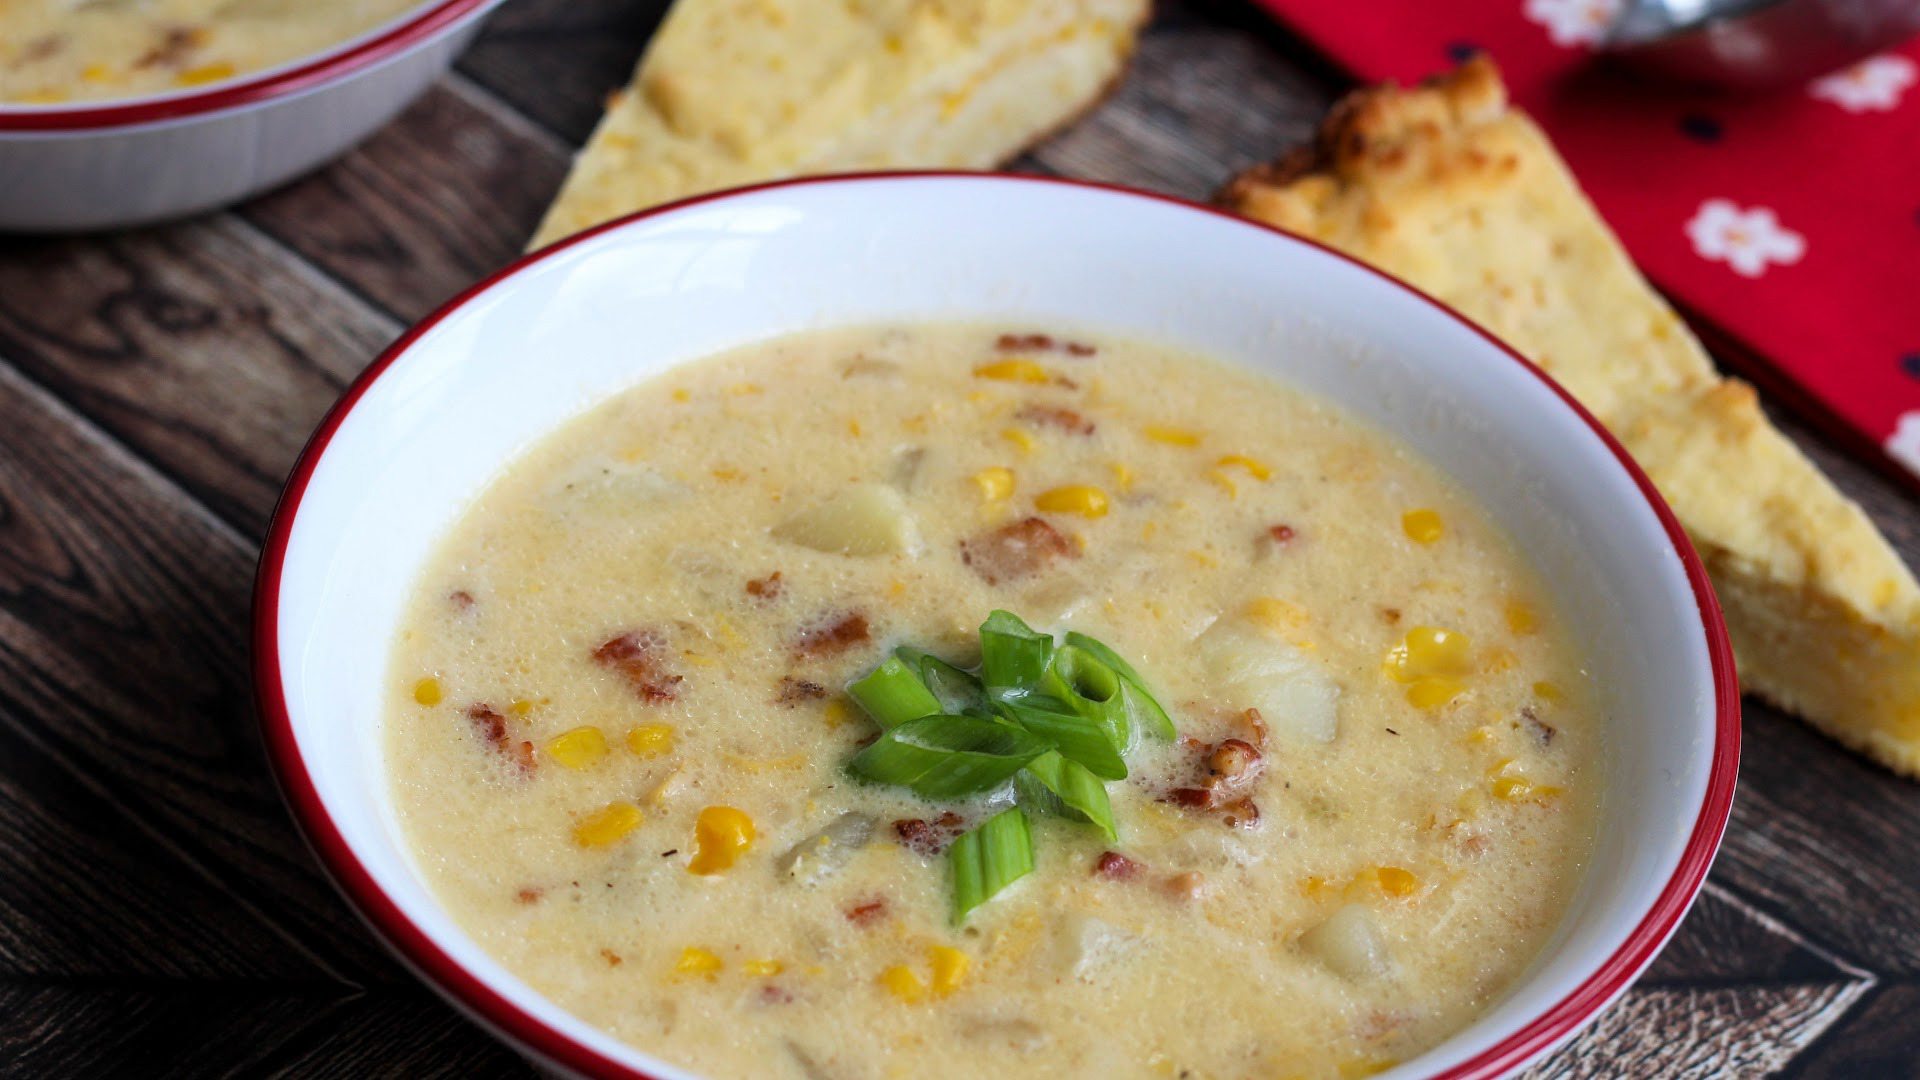 Janice's Simple Corn Chowder Is A Creamy Blend Of Sweet Corn And Smoky ...